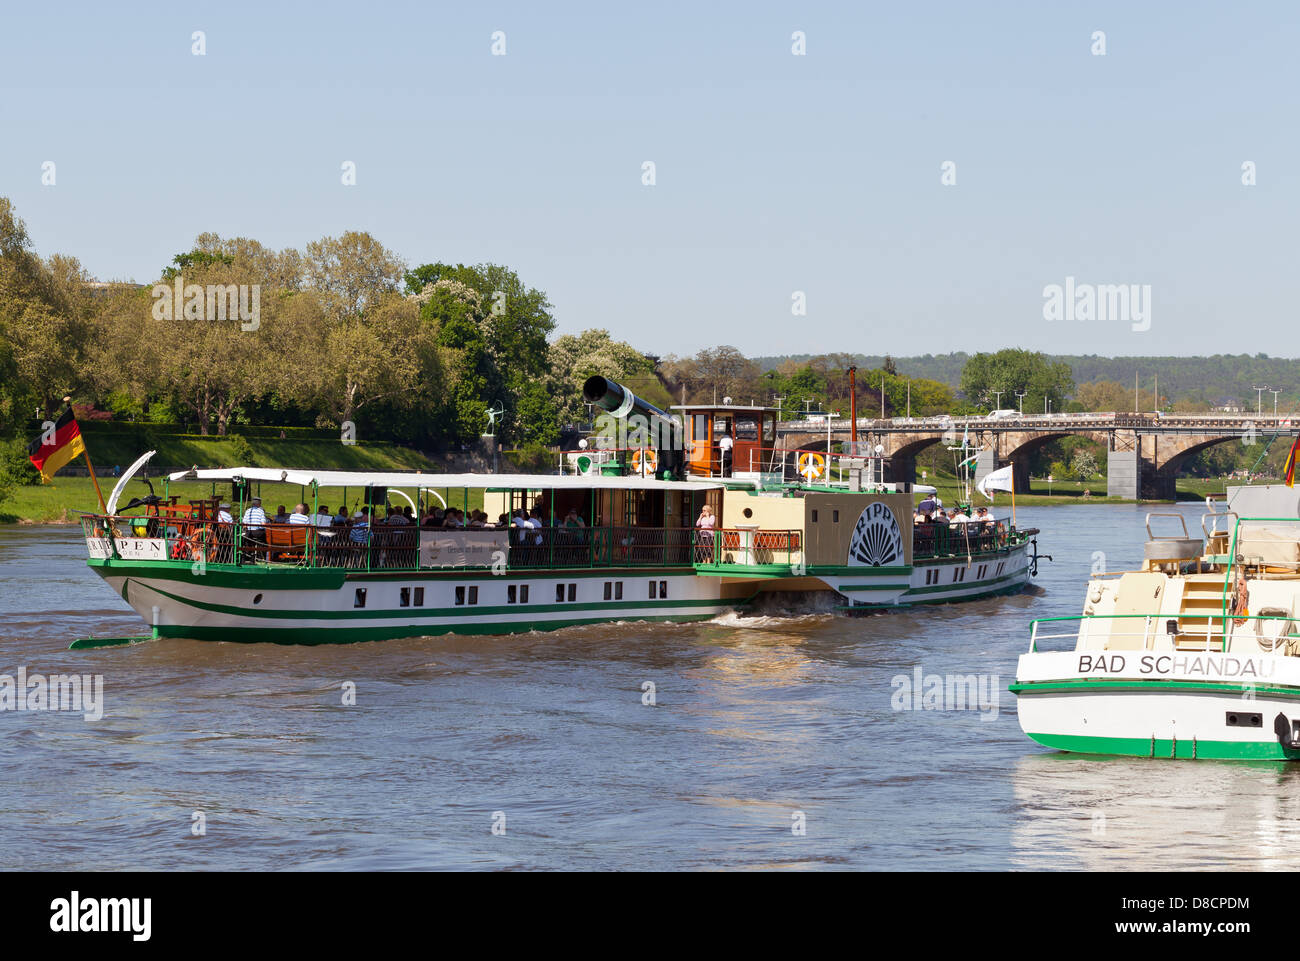 Dresde - River cruise ship, sur l'Elbe, Saxonia, Germany, Europe Banque D'Images